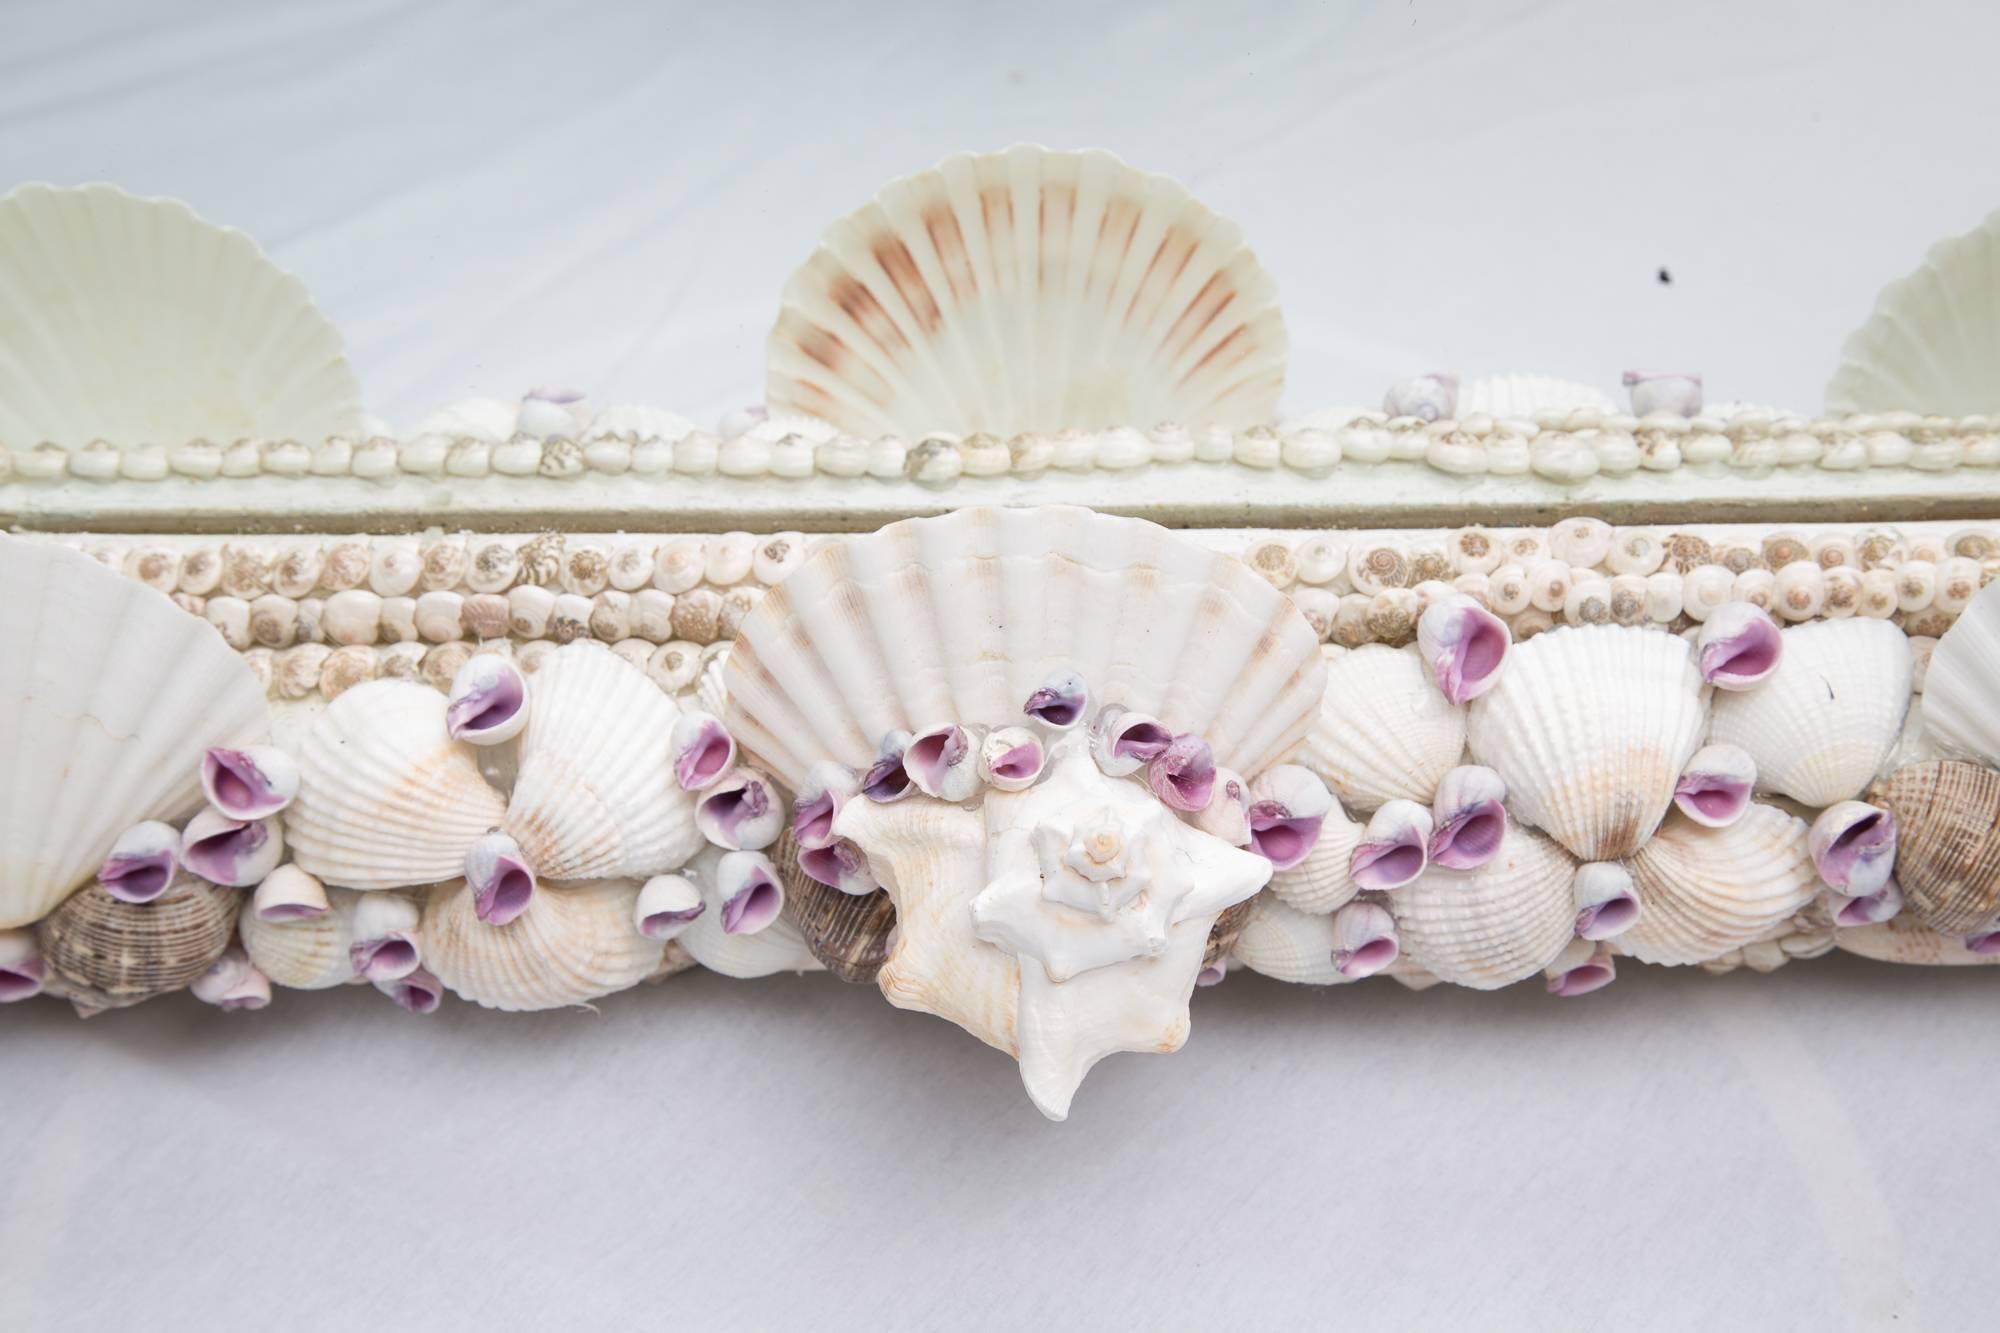 This domed mirror is a beautiful rendition of shell art creating a mirror plate framed by a combination of shells of various types and shapes, 21st century.